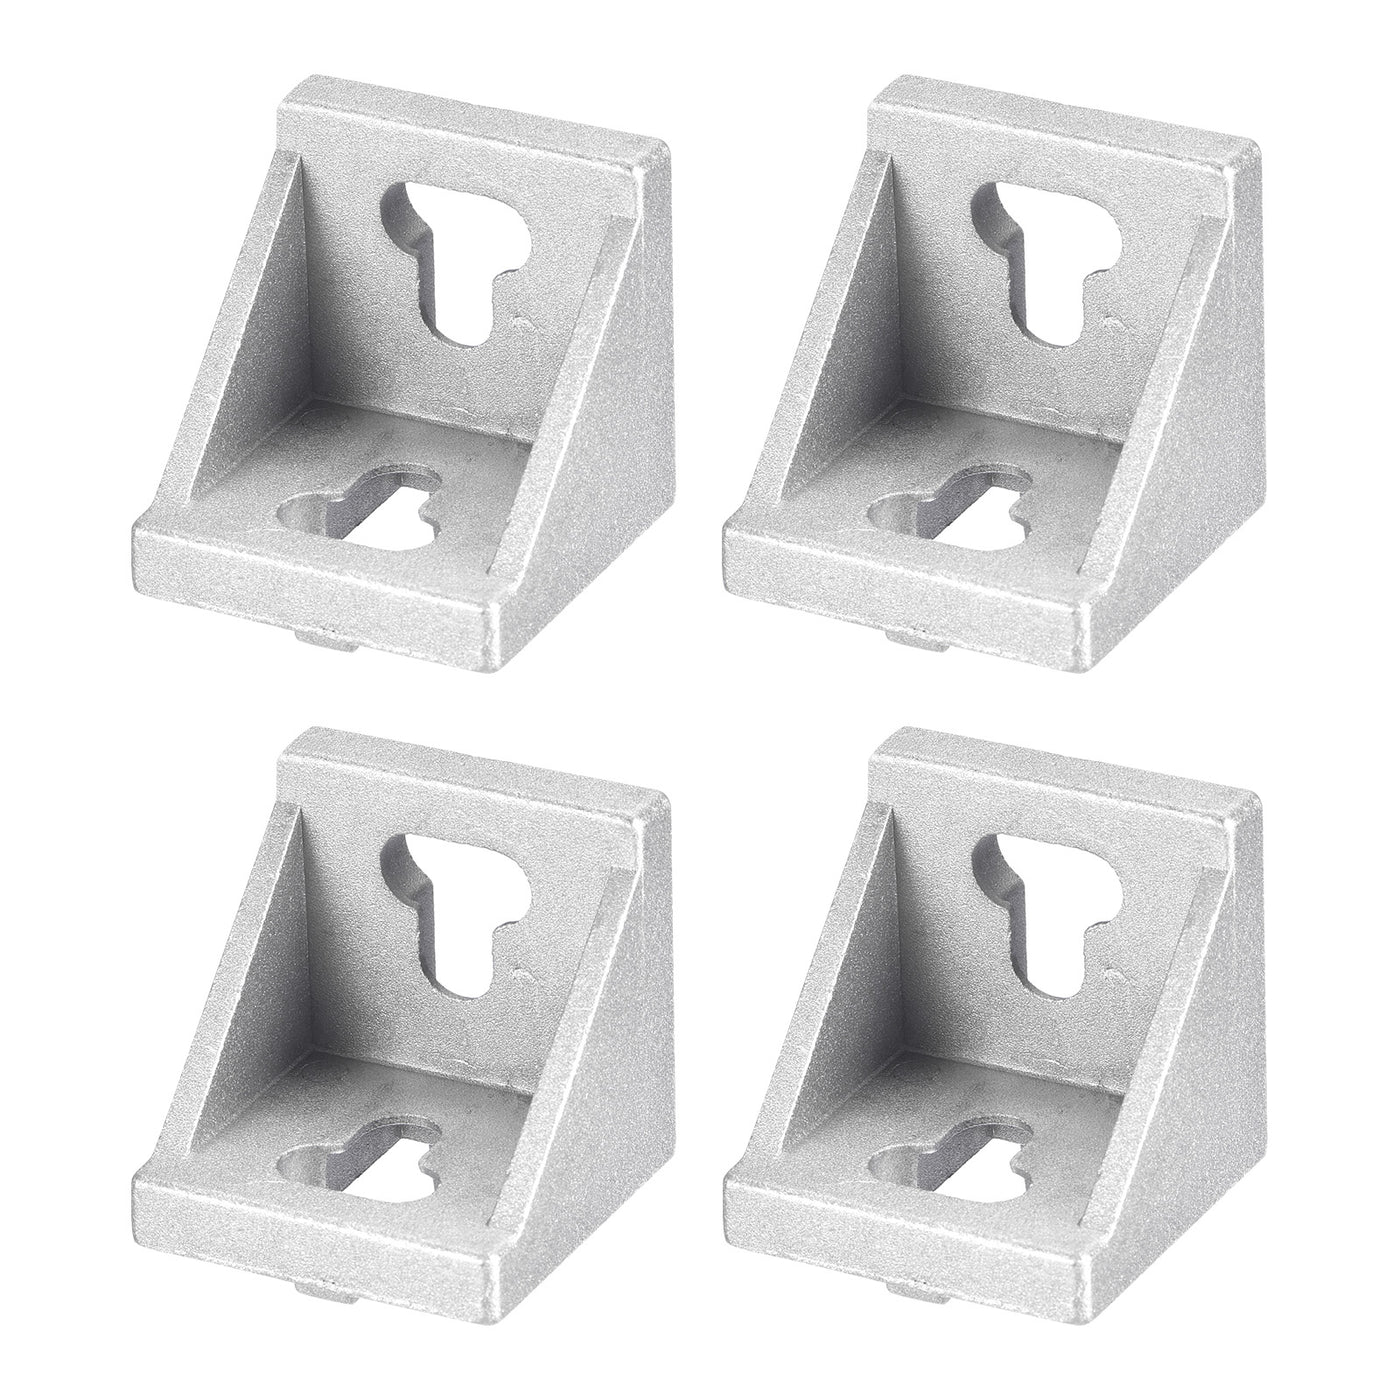 uxcell Uxcell 4Pcs Inside Corner Bracket Gusset, 42x42x43mm 4545 Angle Connectors for 4545/5050 Series Aluminum Extrusion Profile Silver